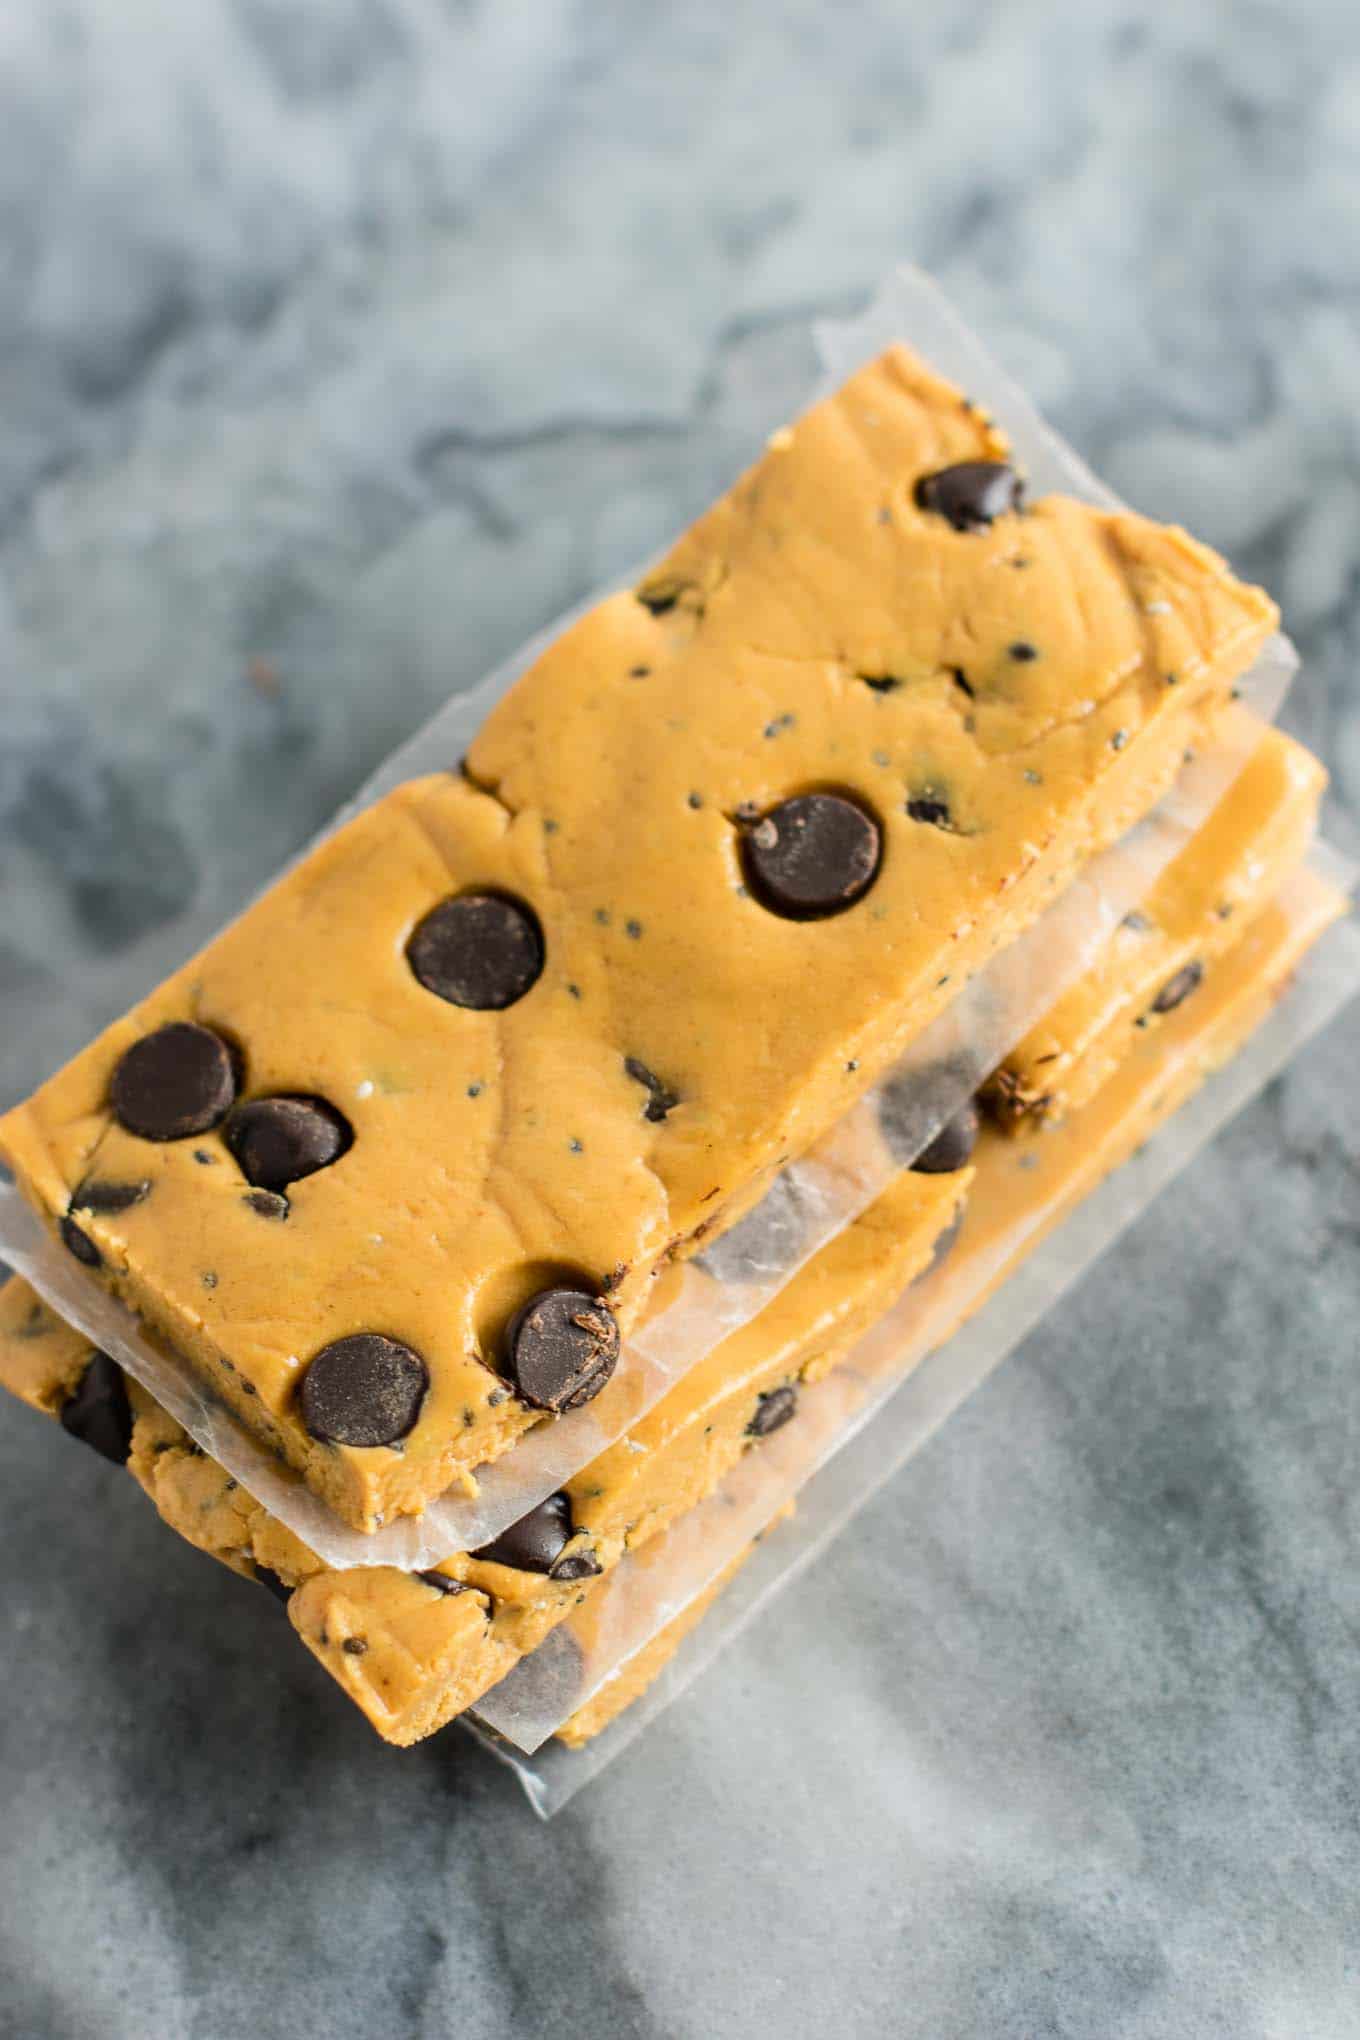 Chocolate Chip Peanut Butter Protein Bars made with honey, peanut butter, and a few other simple ingredients (gluten free.) Make these ahead for easy snack prep! #glutenfree #proteinbars #peanutbutter #chocolatechip #nobake #snacks #mealprep 